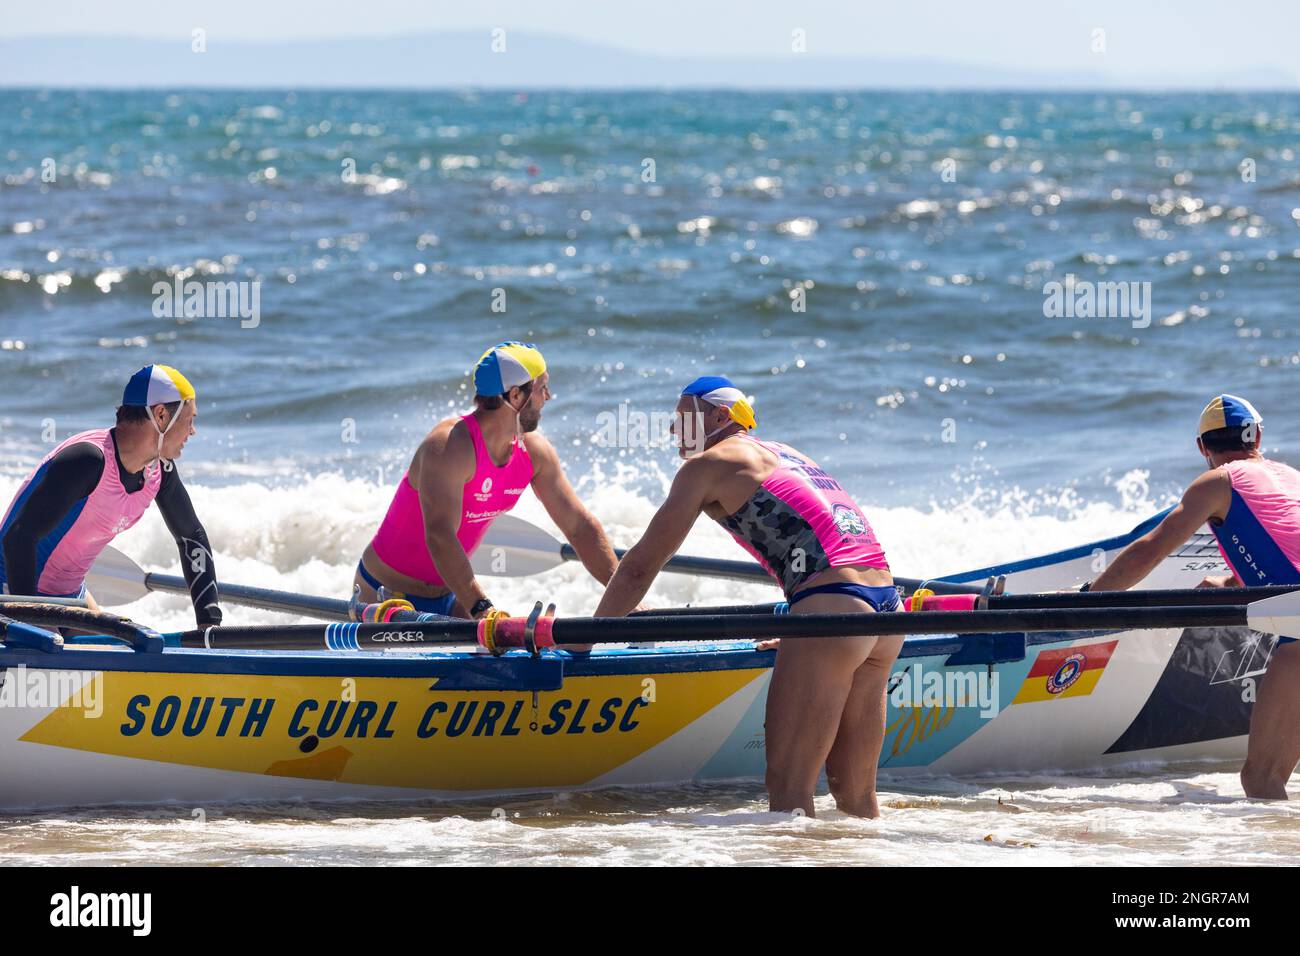 Traditional surfboat racing on Collaroy beach in Sydney, summer 2023, NSW,Australia, mens south curl curl team Stock Photo